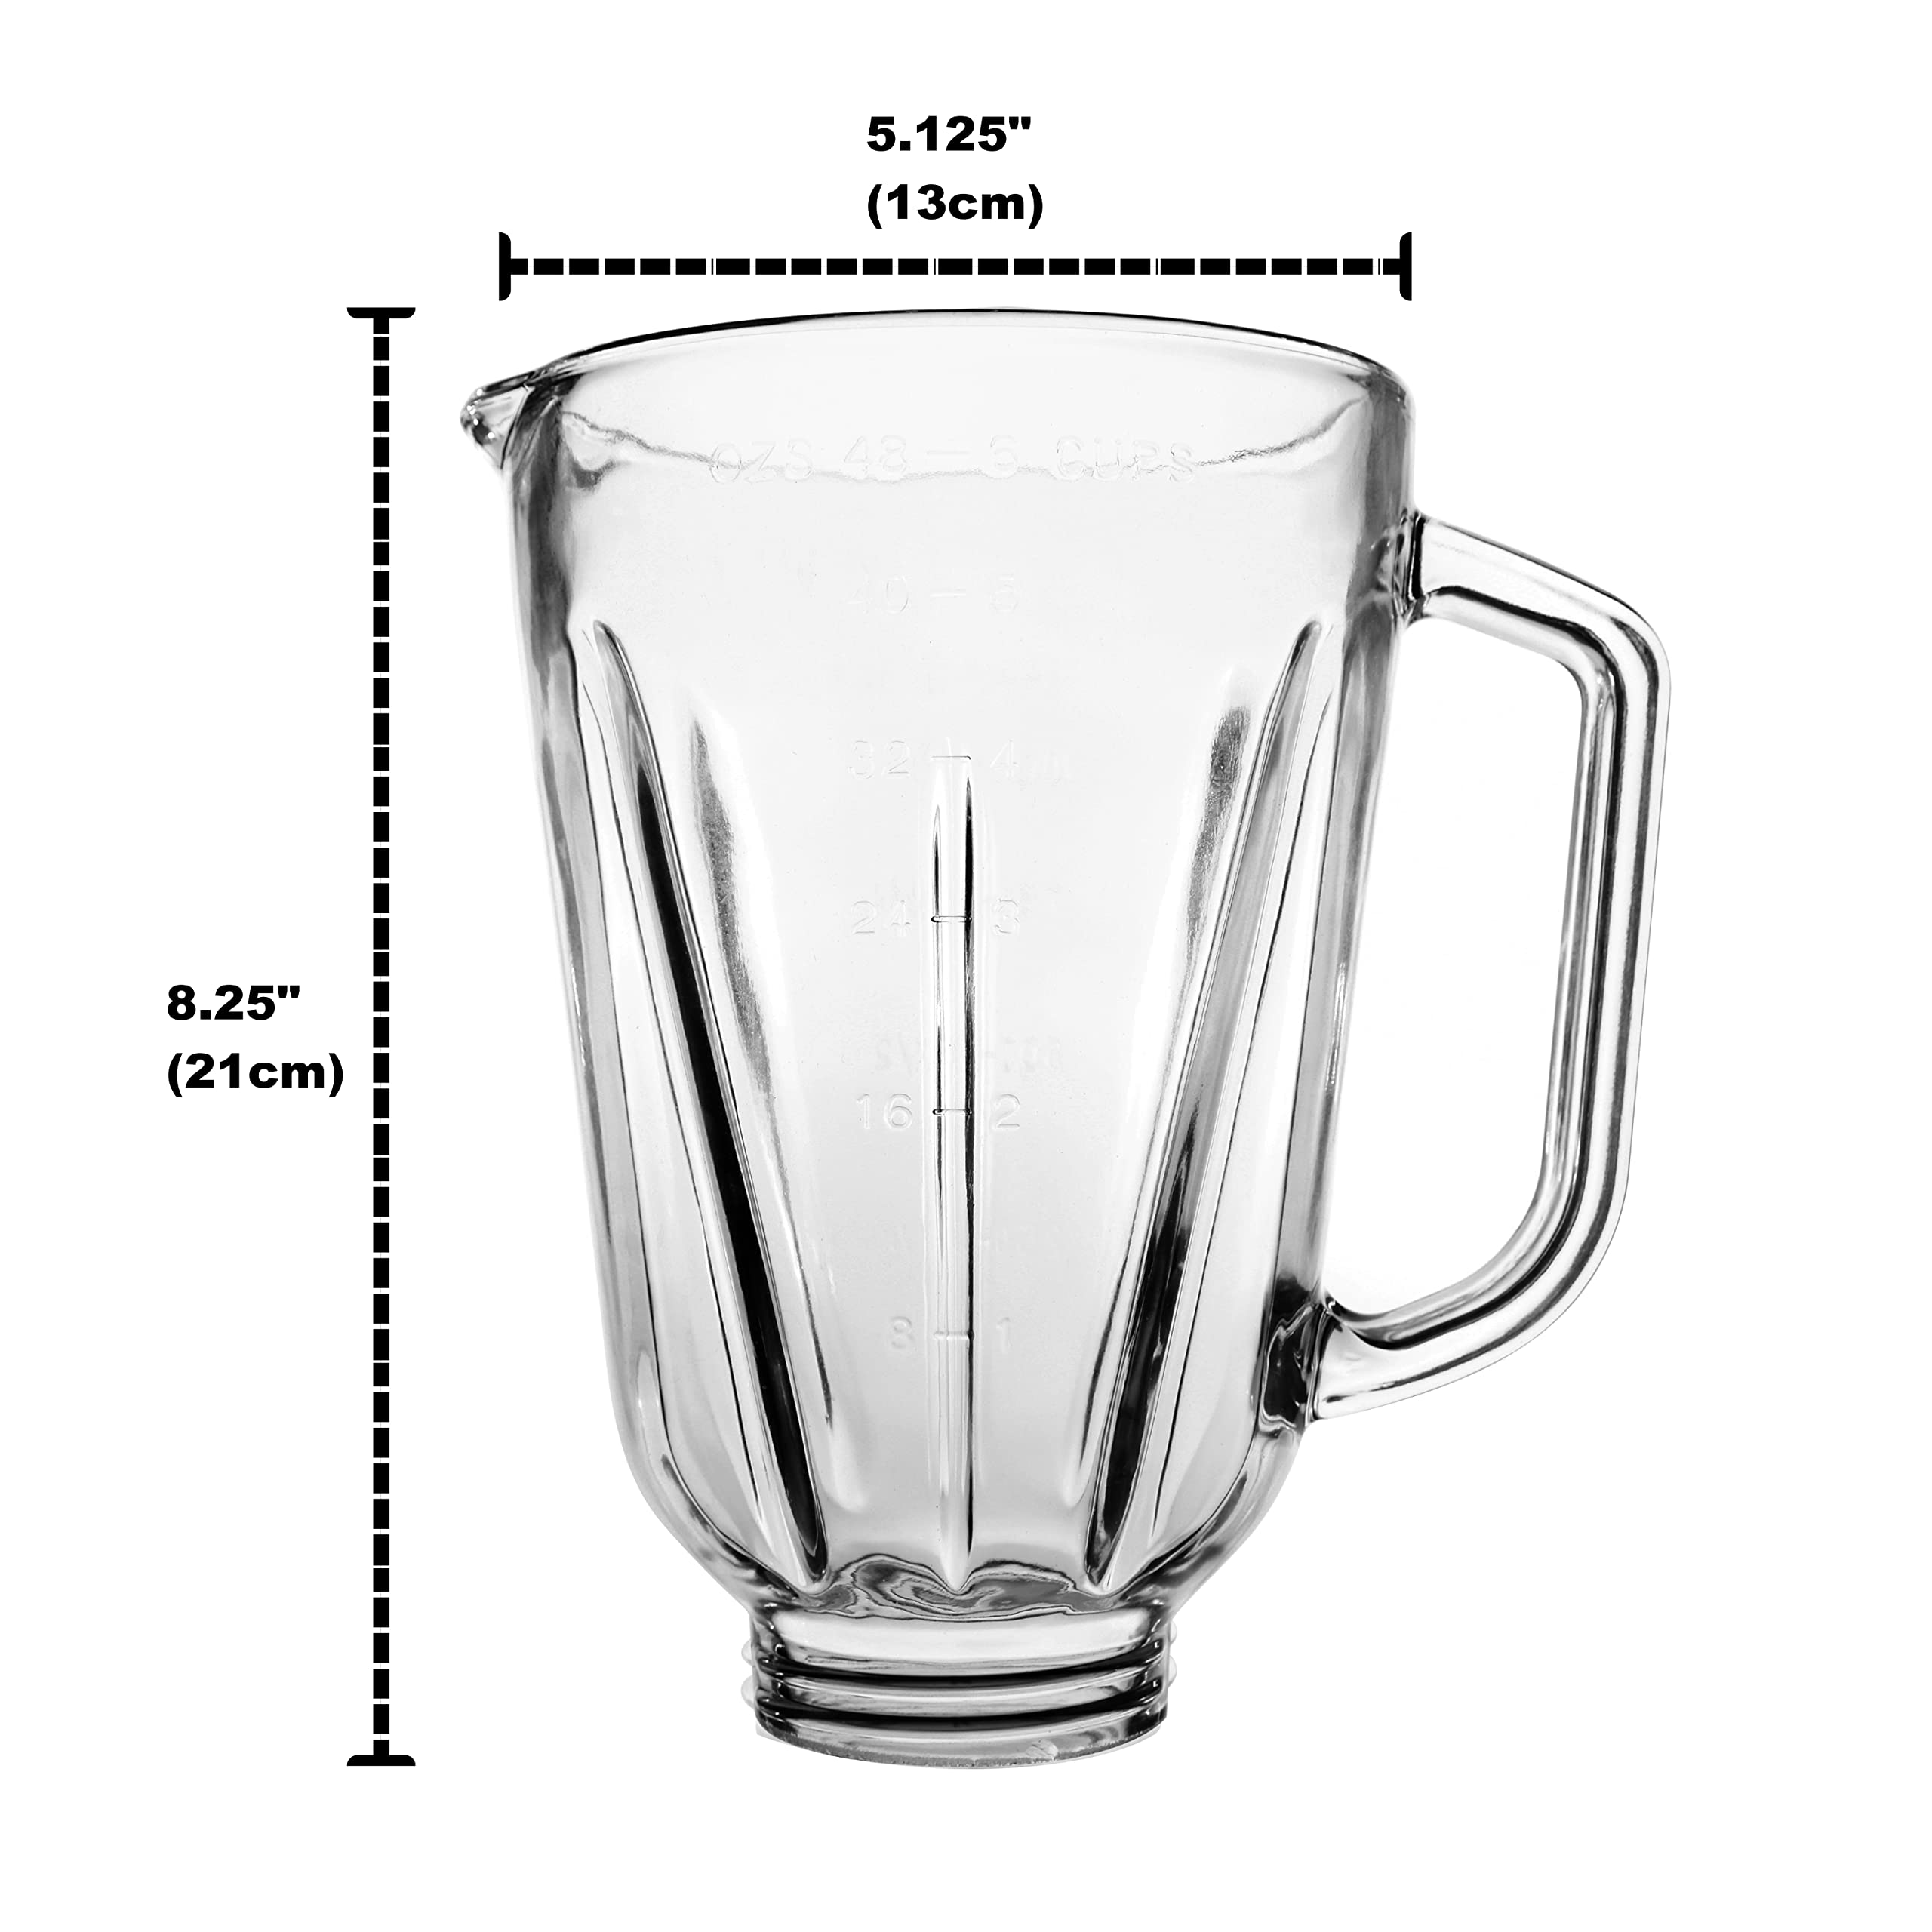 Univen 6 Cup Round Glass Blender Jar Compatible with Hamilton Beach Blenders